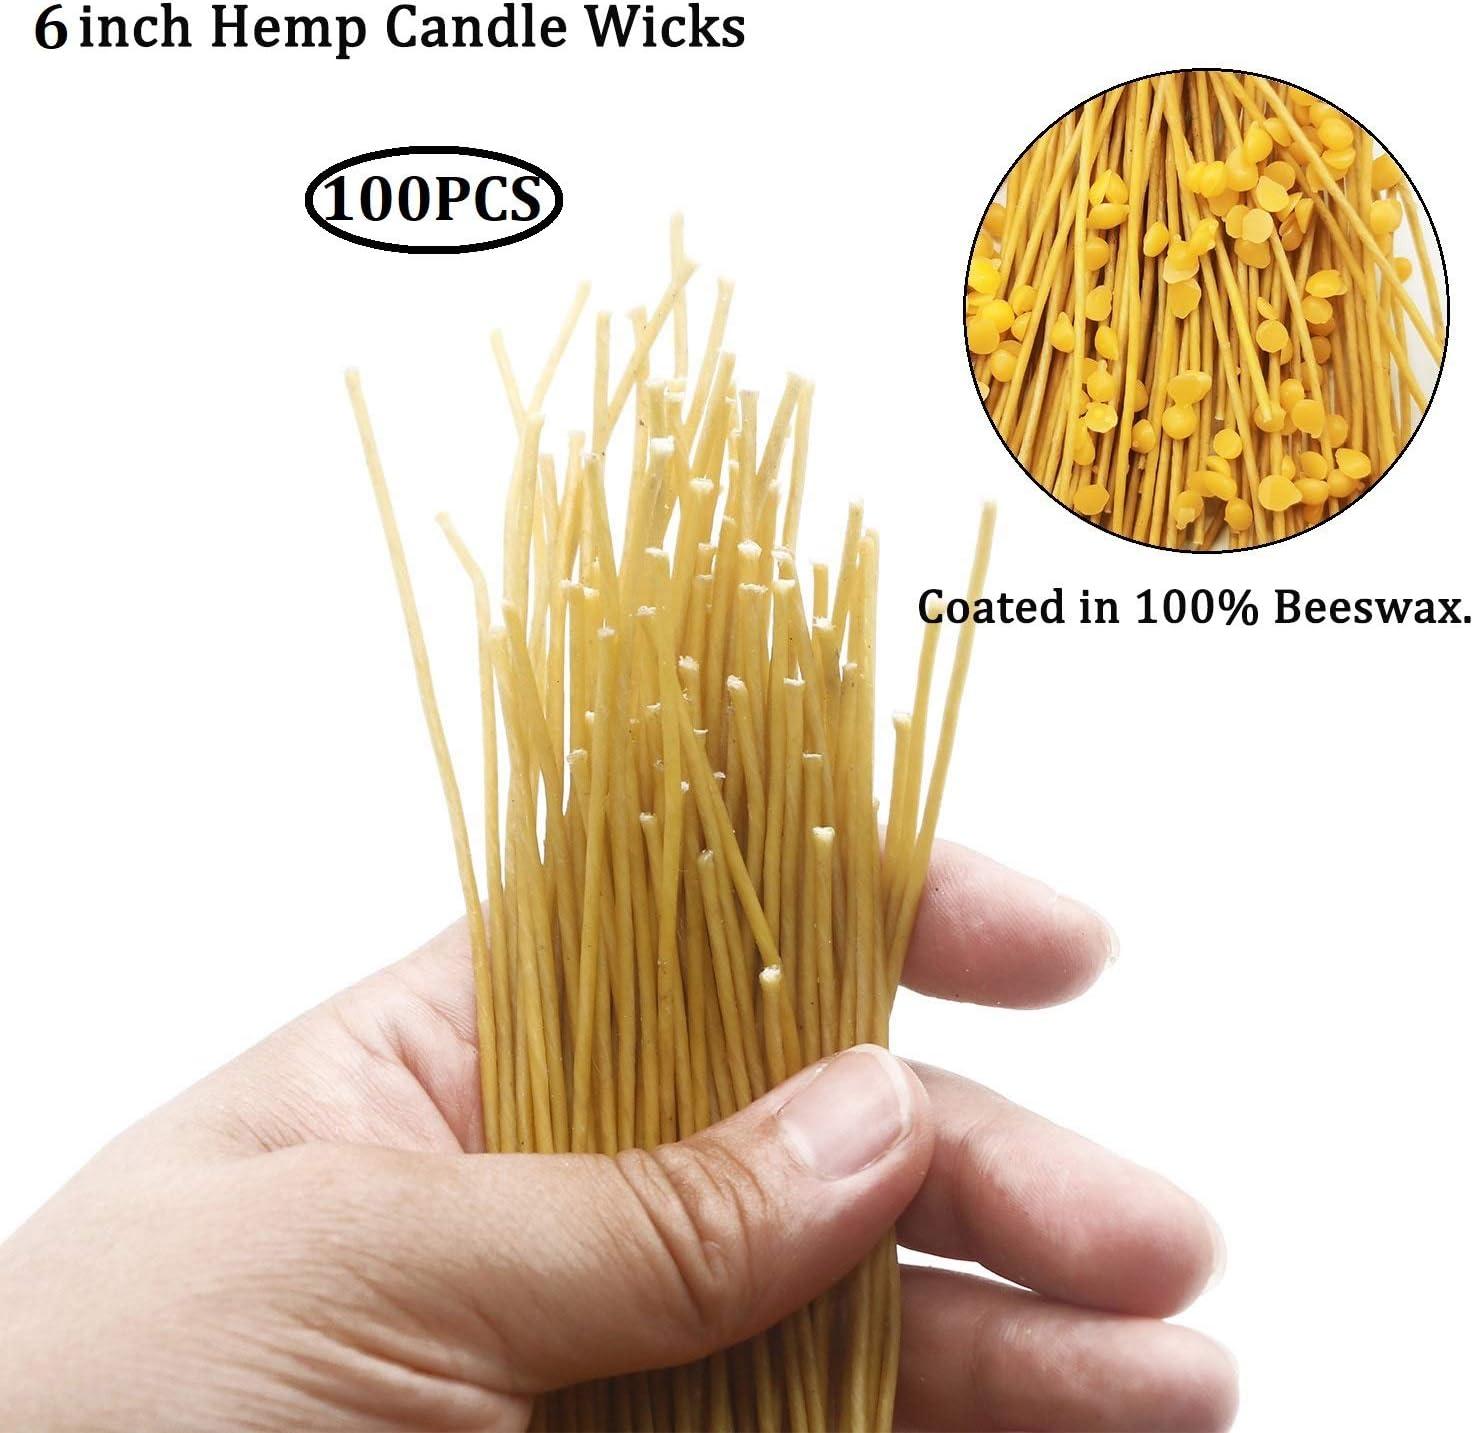 2mm Organic Hemp Candle Wick (Beeswax Coated) + Wick Sustainer